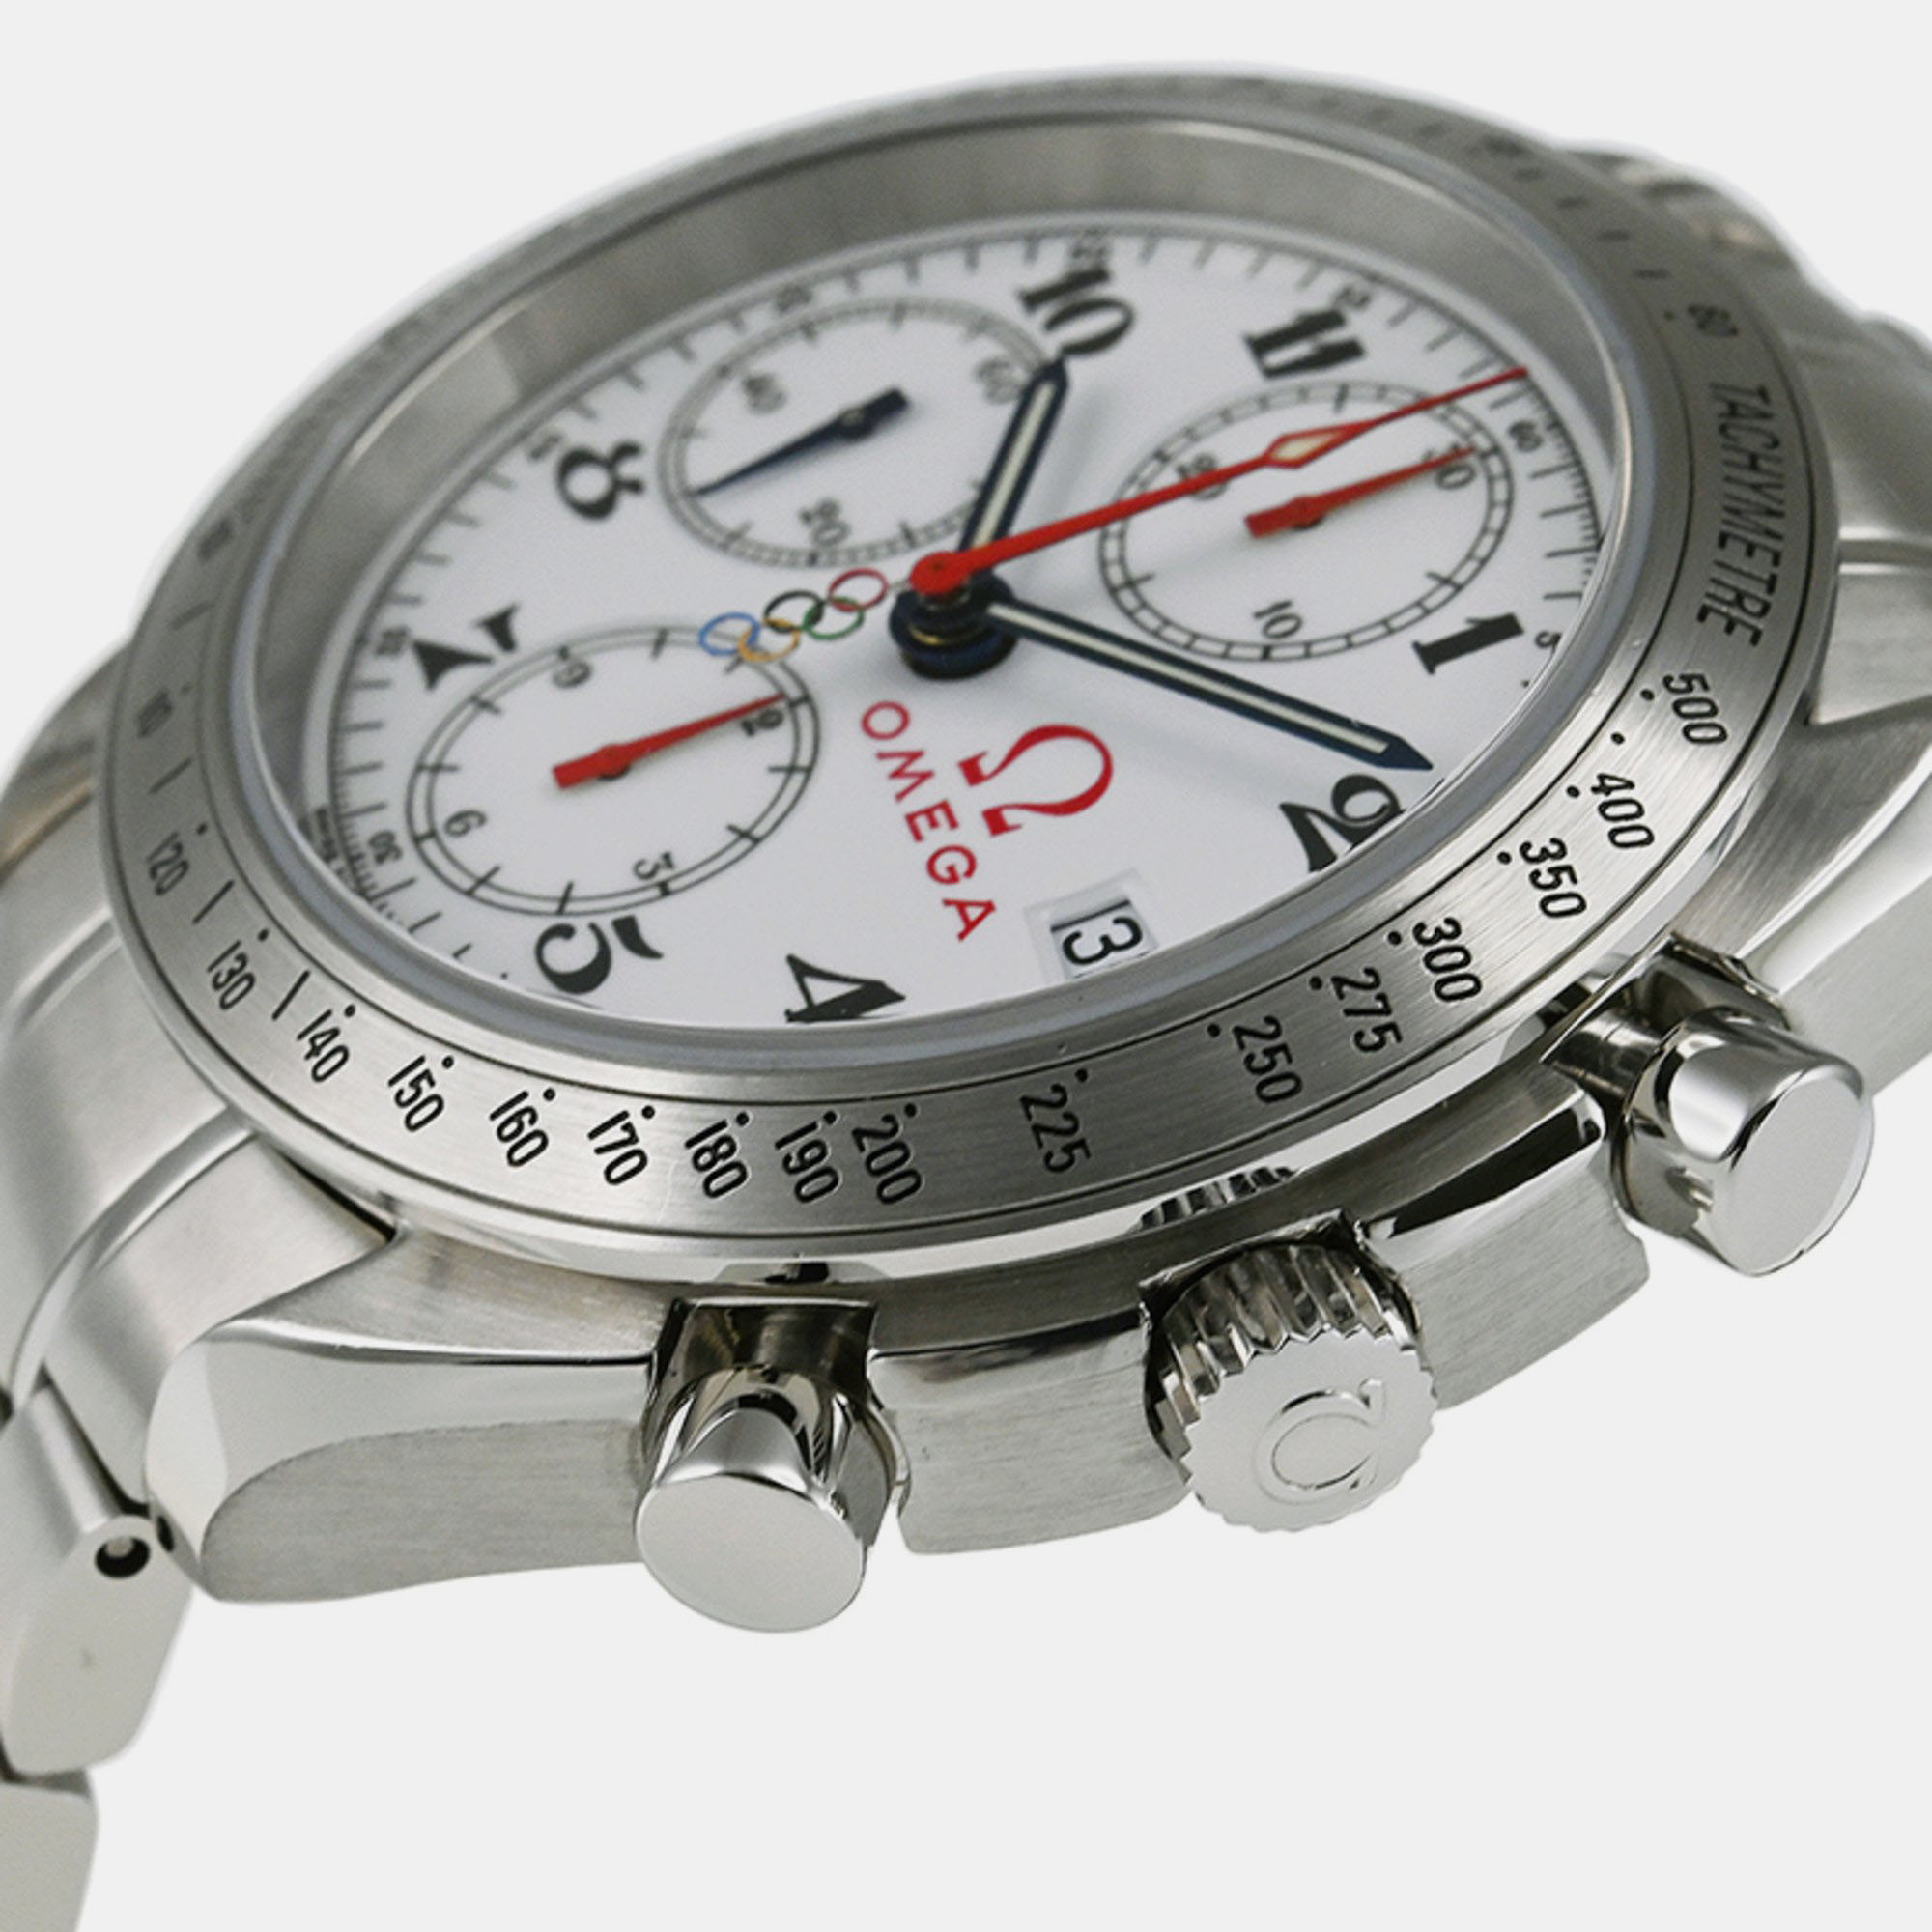 Omega White Stainless Steel Speedmaster 323.10.40.40.04.001 Automatic Men's Wristwatch 40 Mm